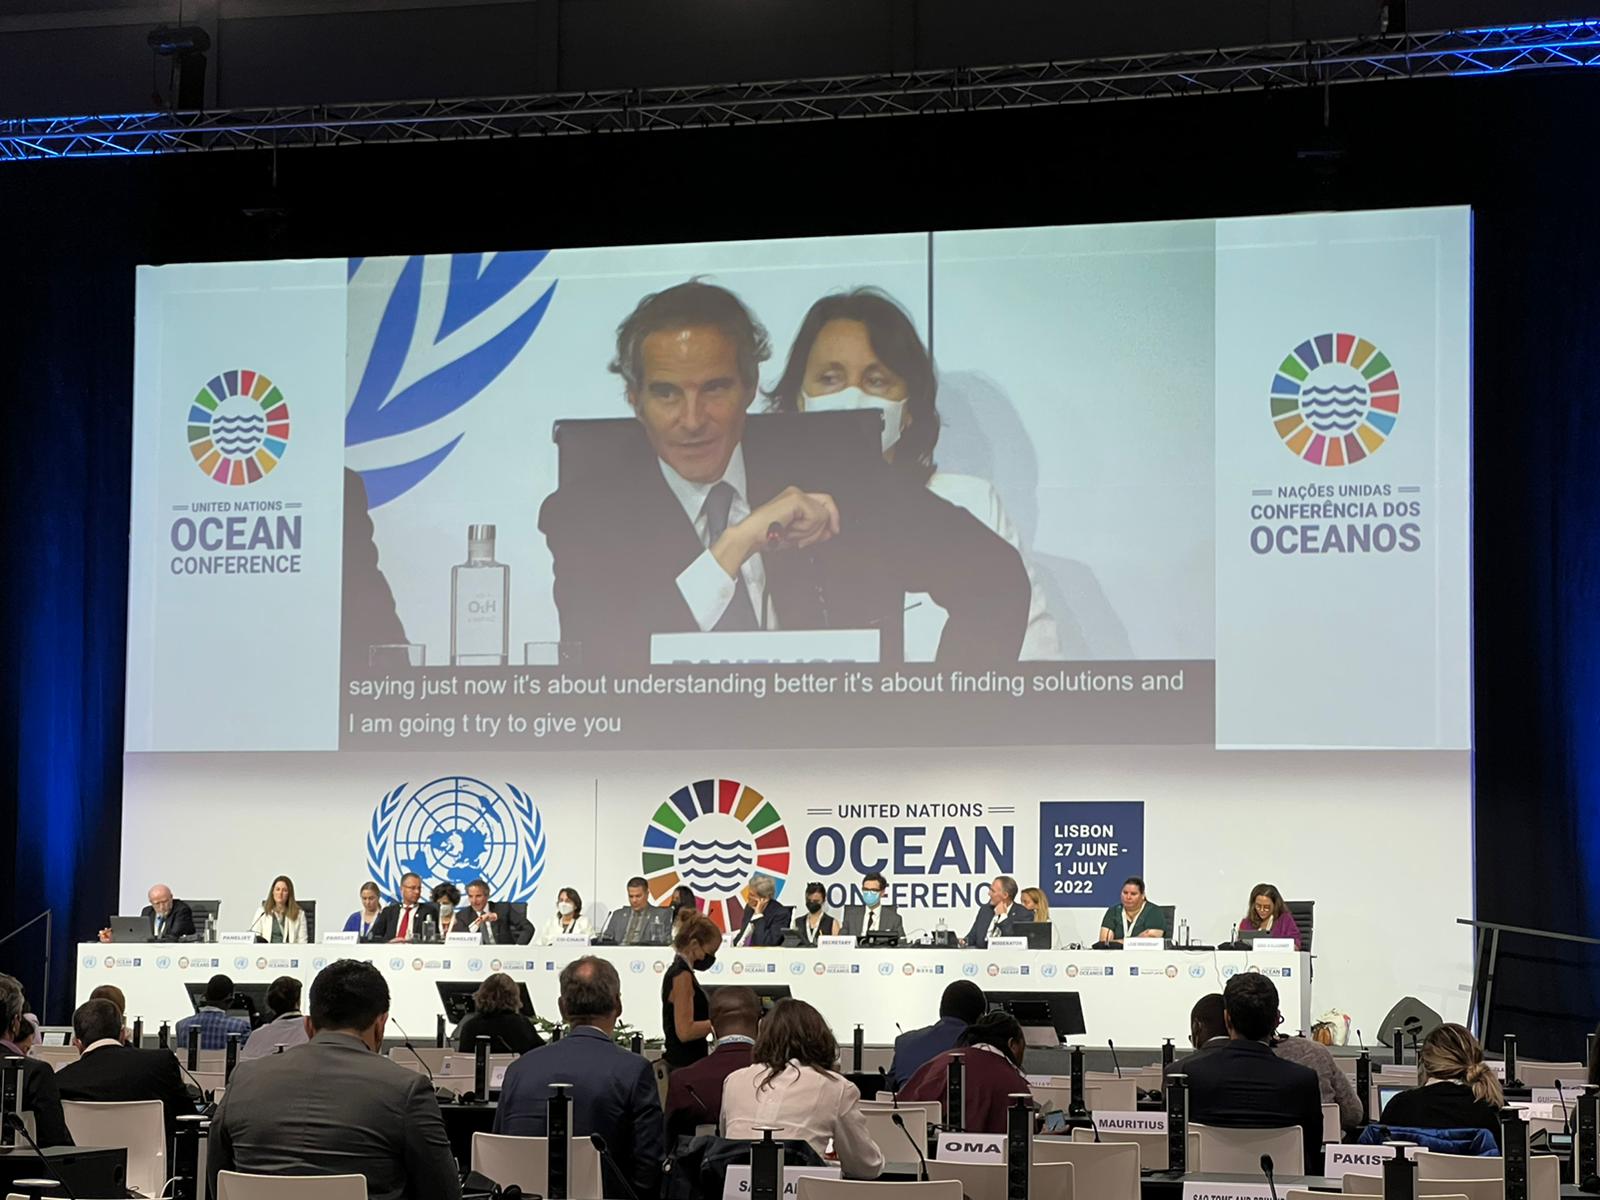 IAEA Director General in Portugal: Nuclear Cooperation and Saving the Ocean